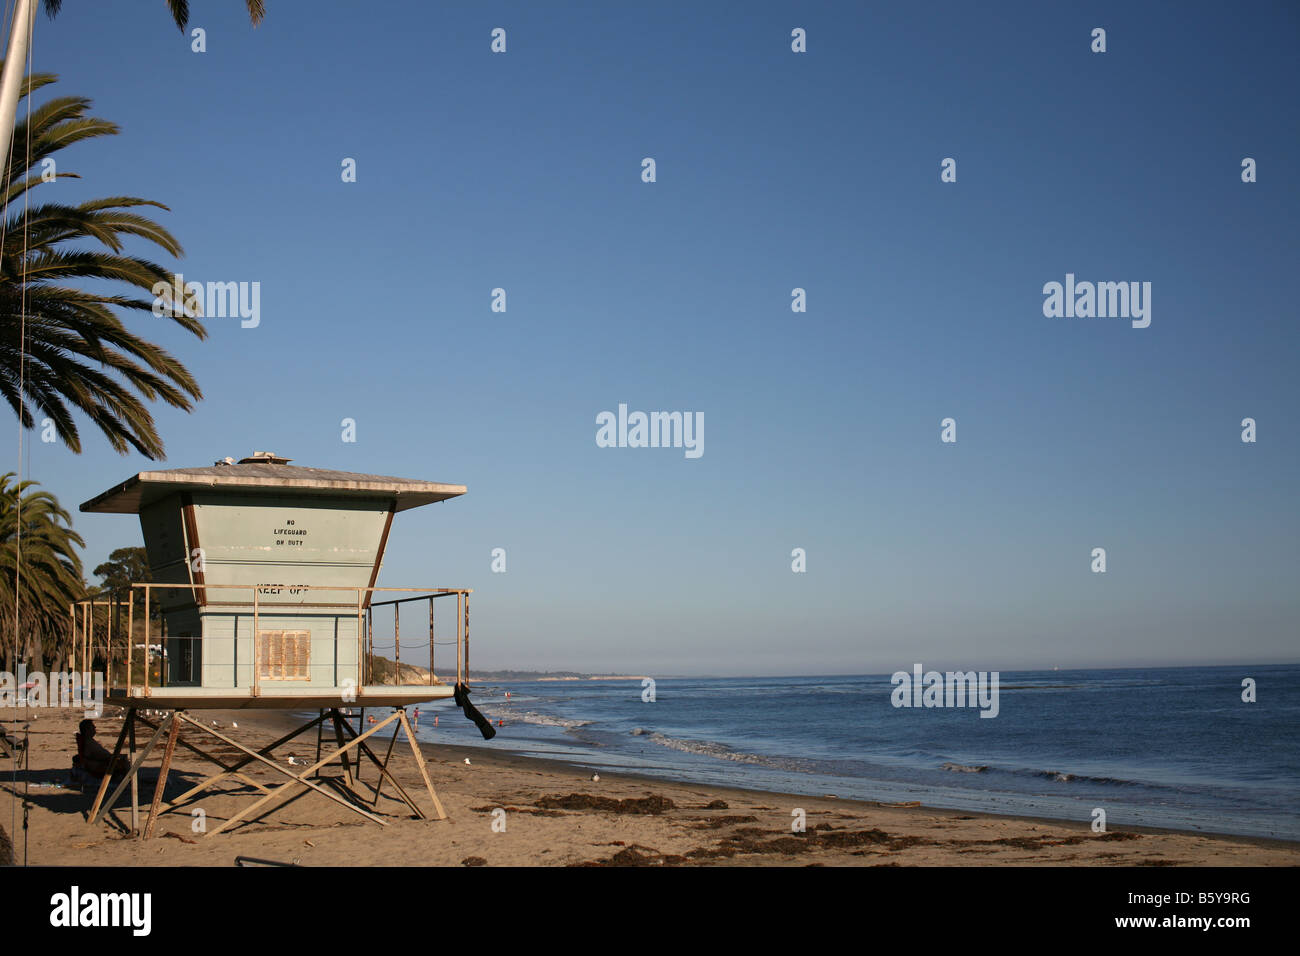 Lifeguard Station La Refugio California State Beach Banque D'Images